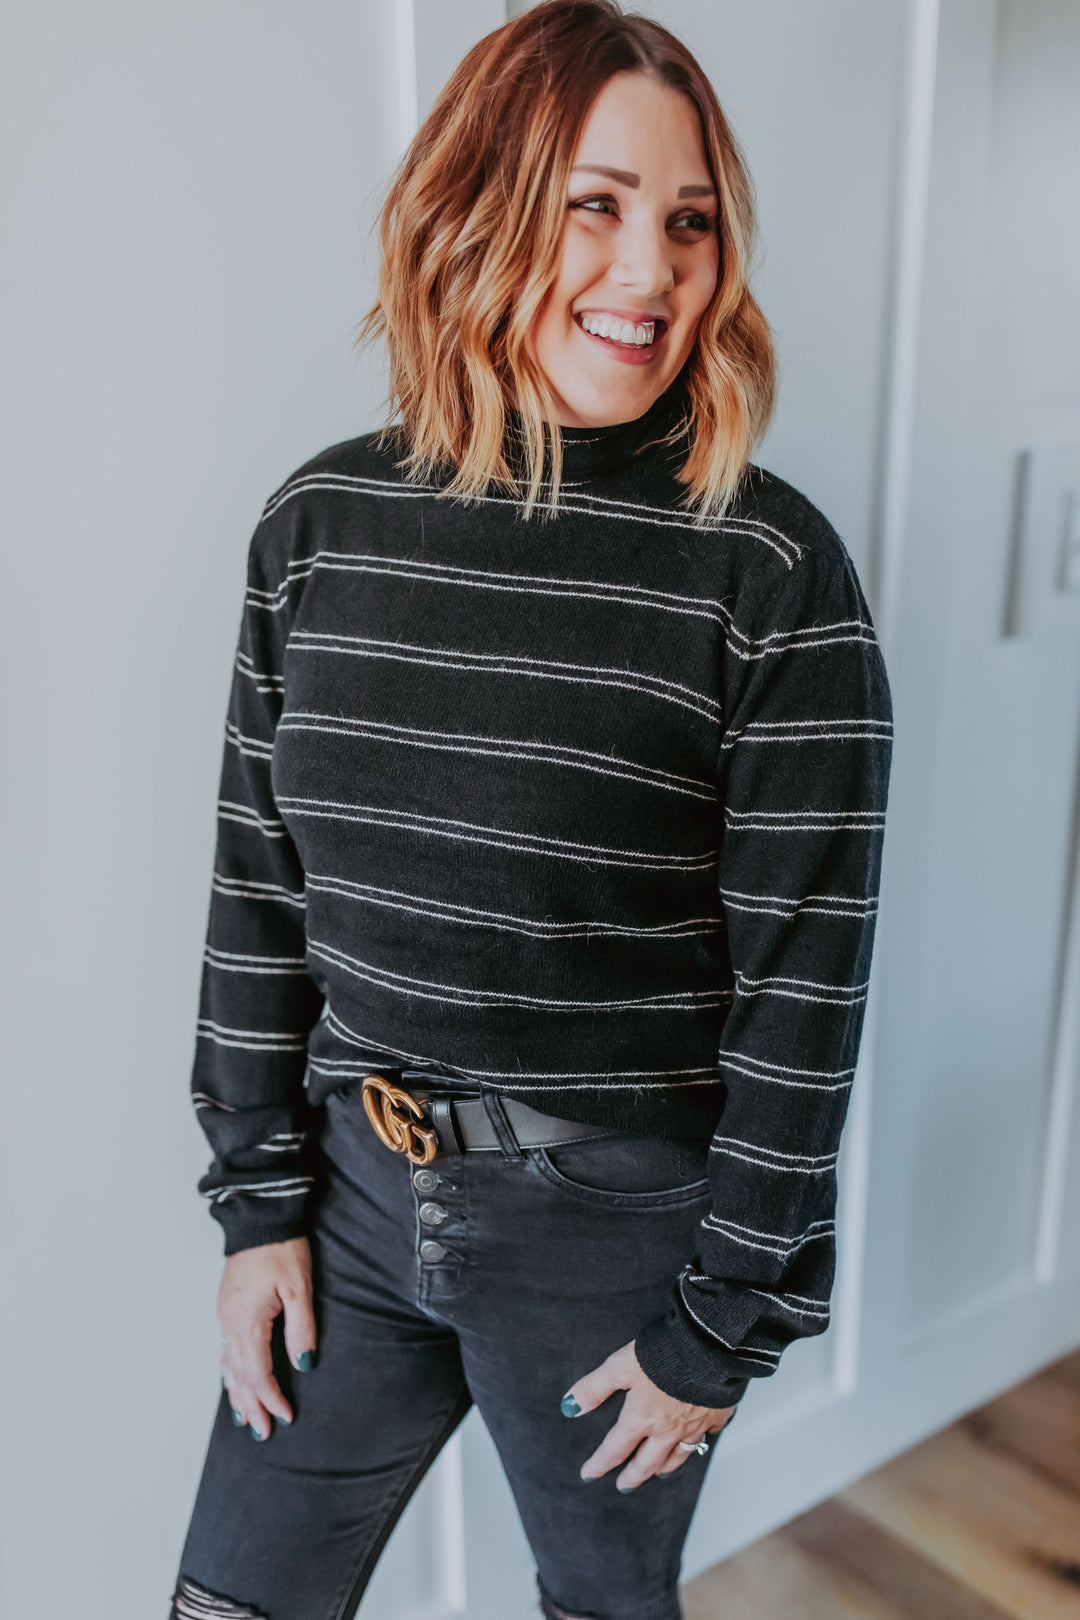 The Melanie Pinstripe Sweater - One Eleven Olive Boutique